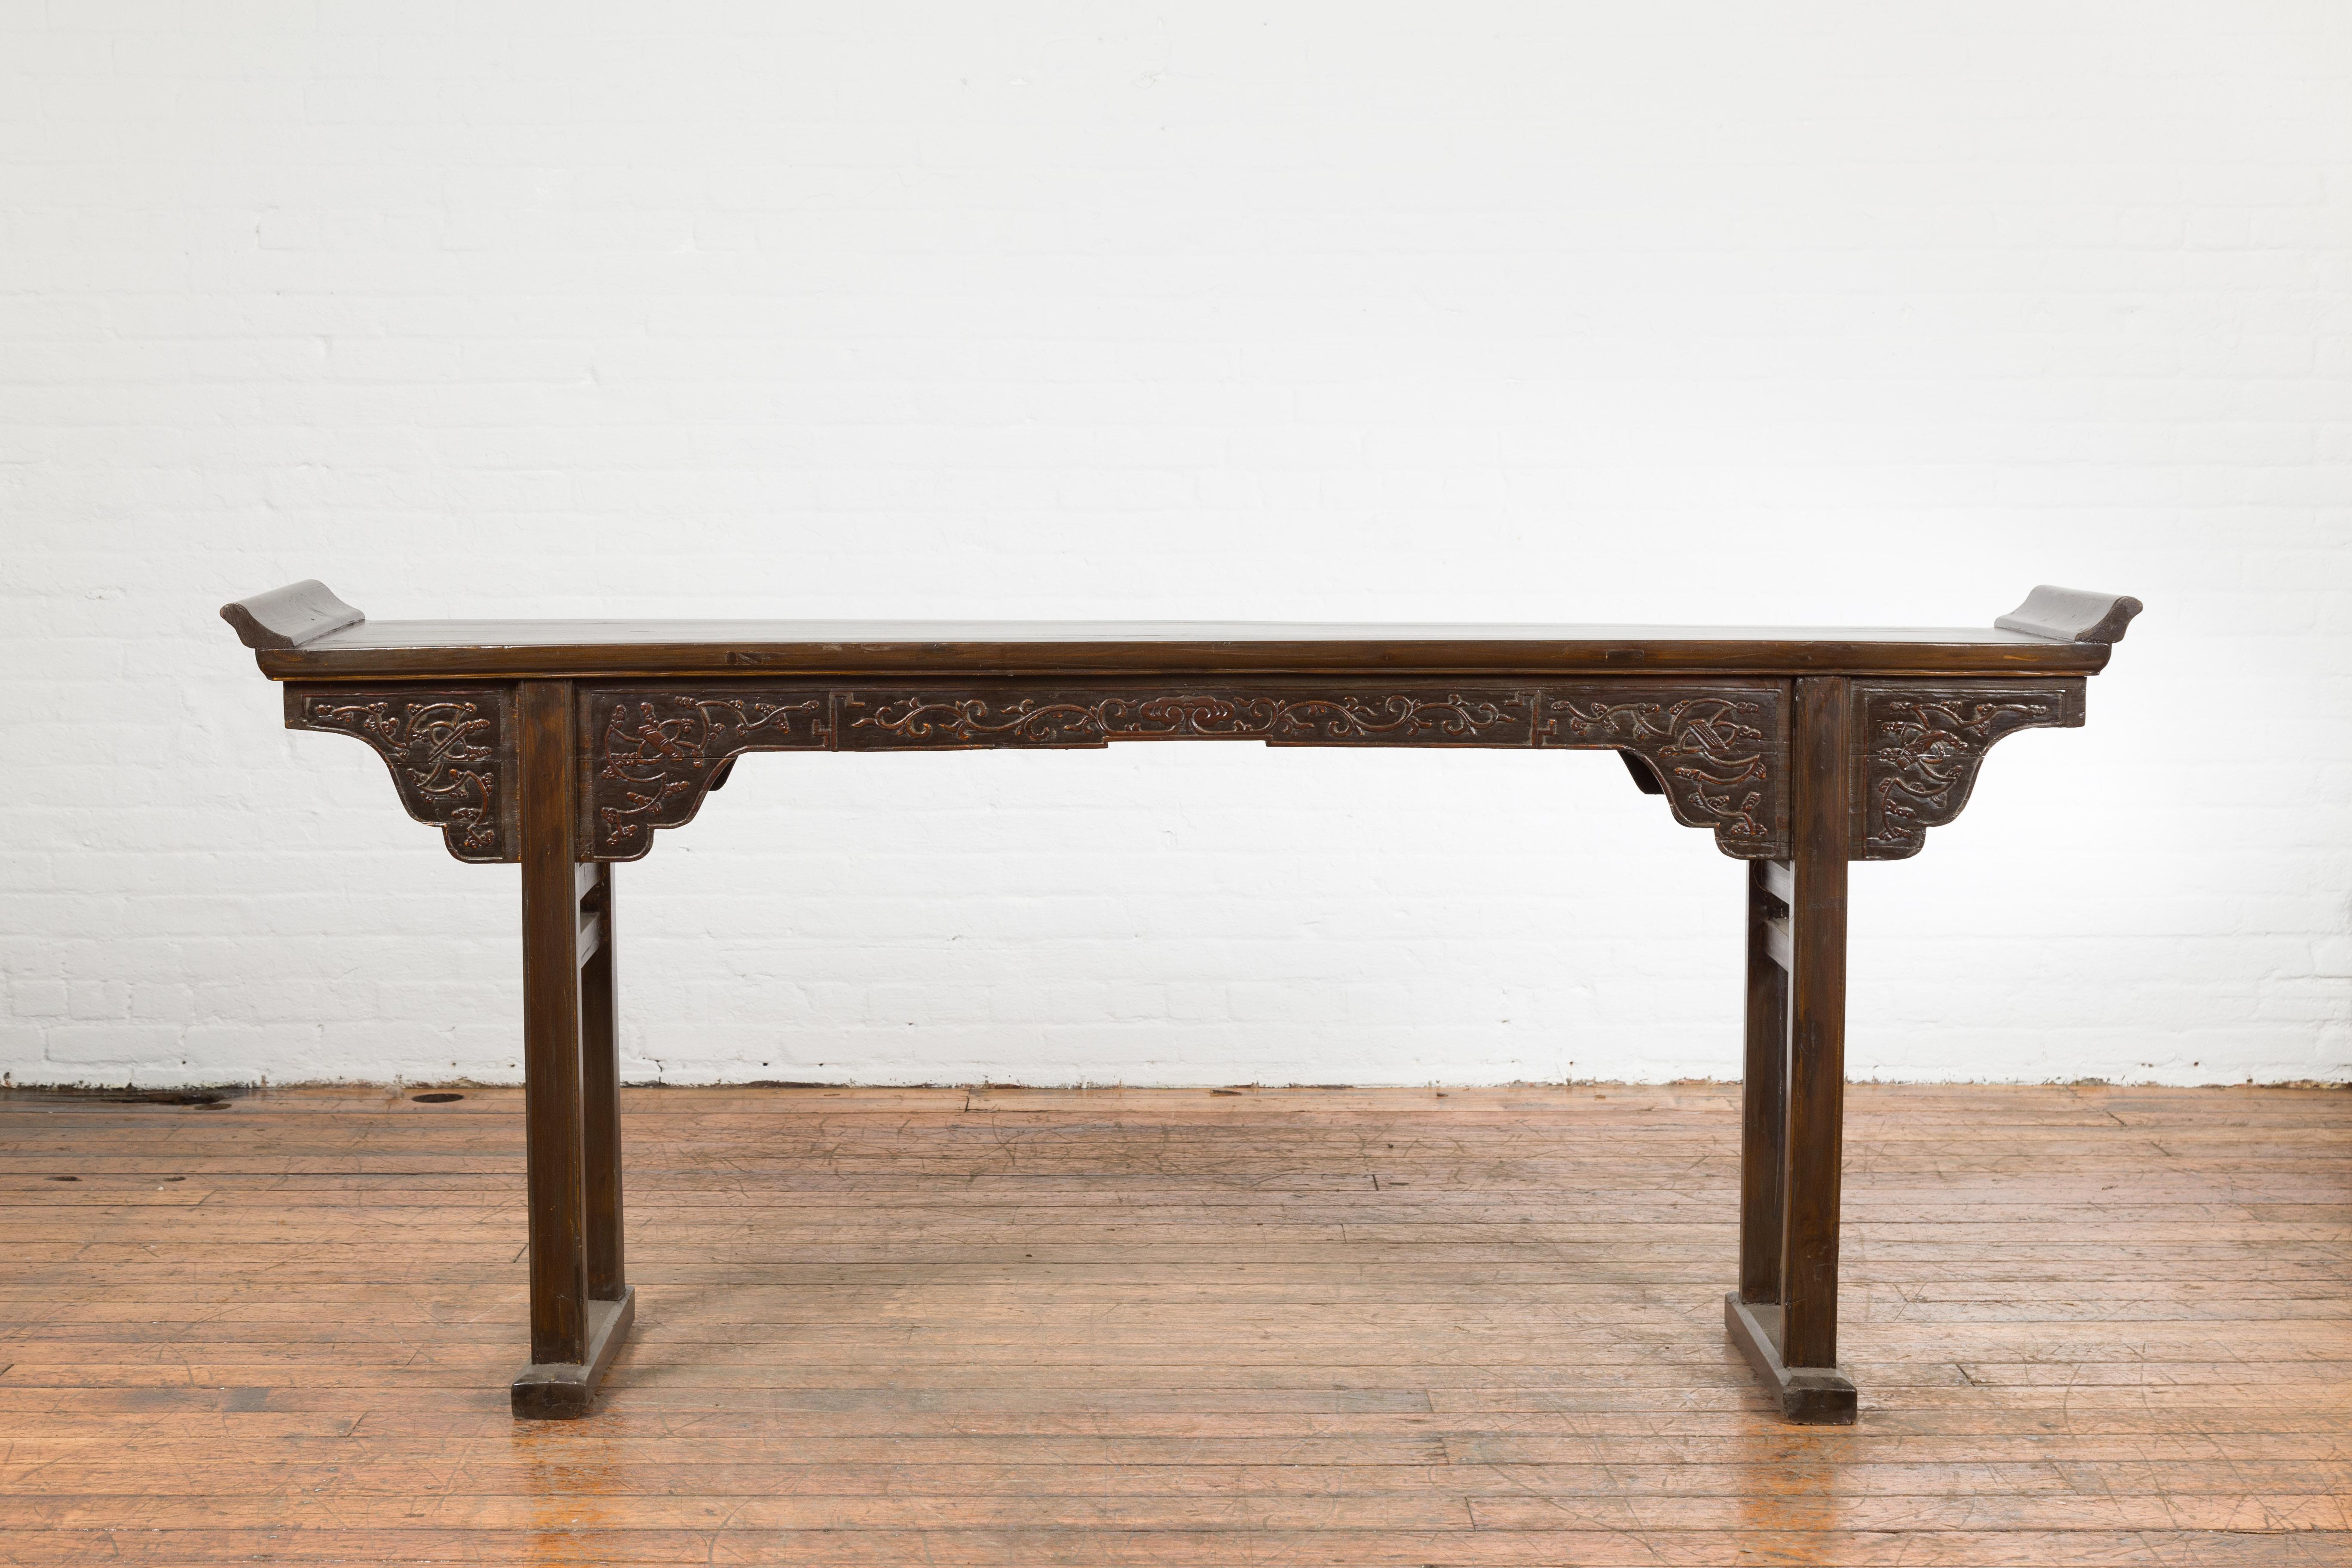 Wood Chinese Qing Dynasty 19th Century Altar Console Table with Foliage-Carved Apron